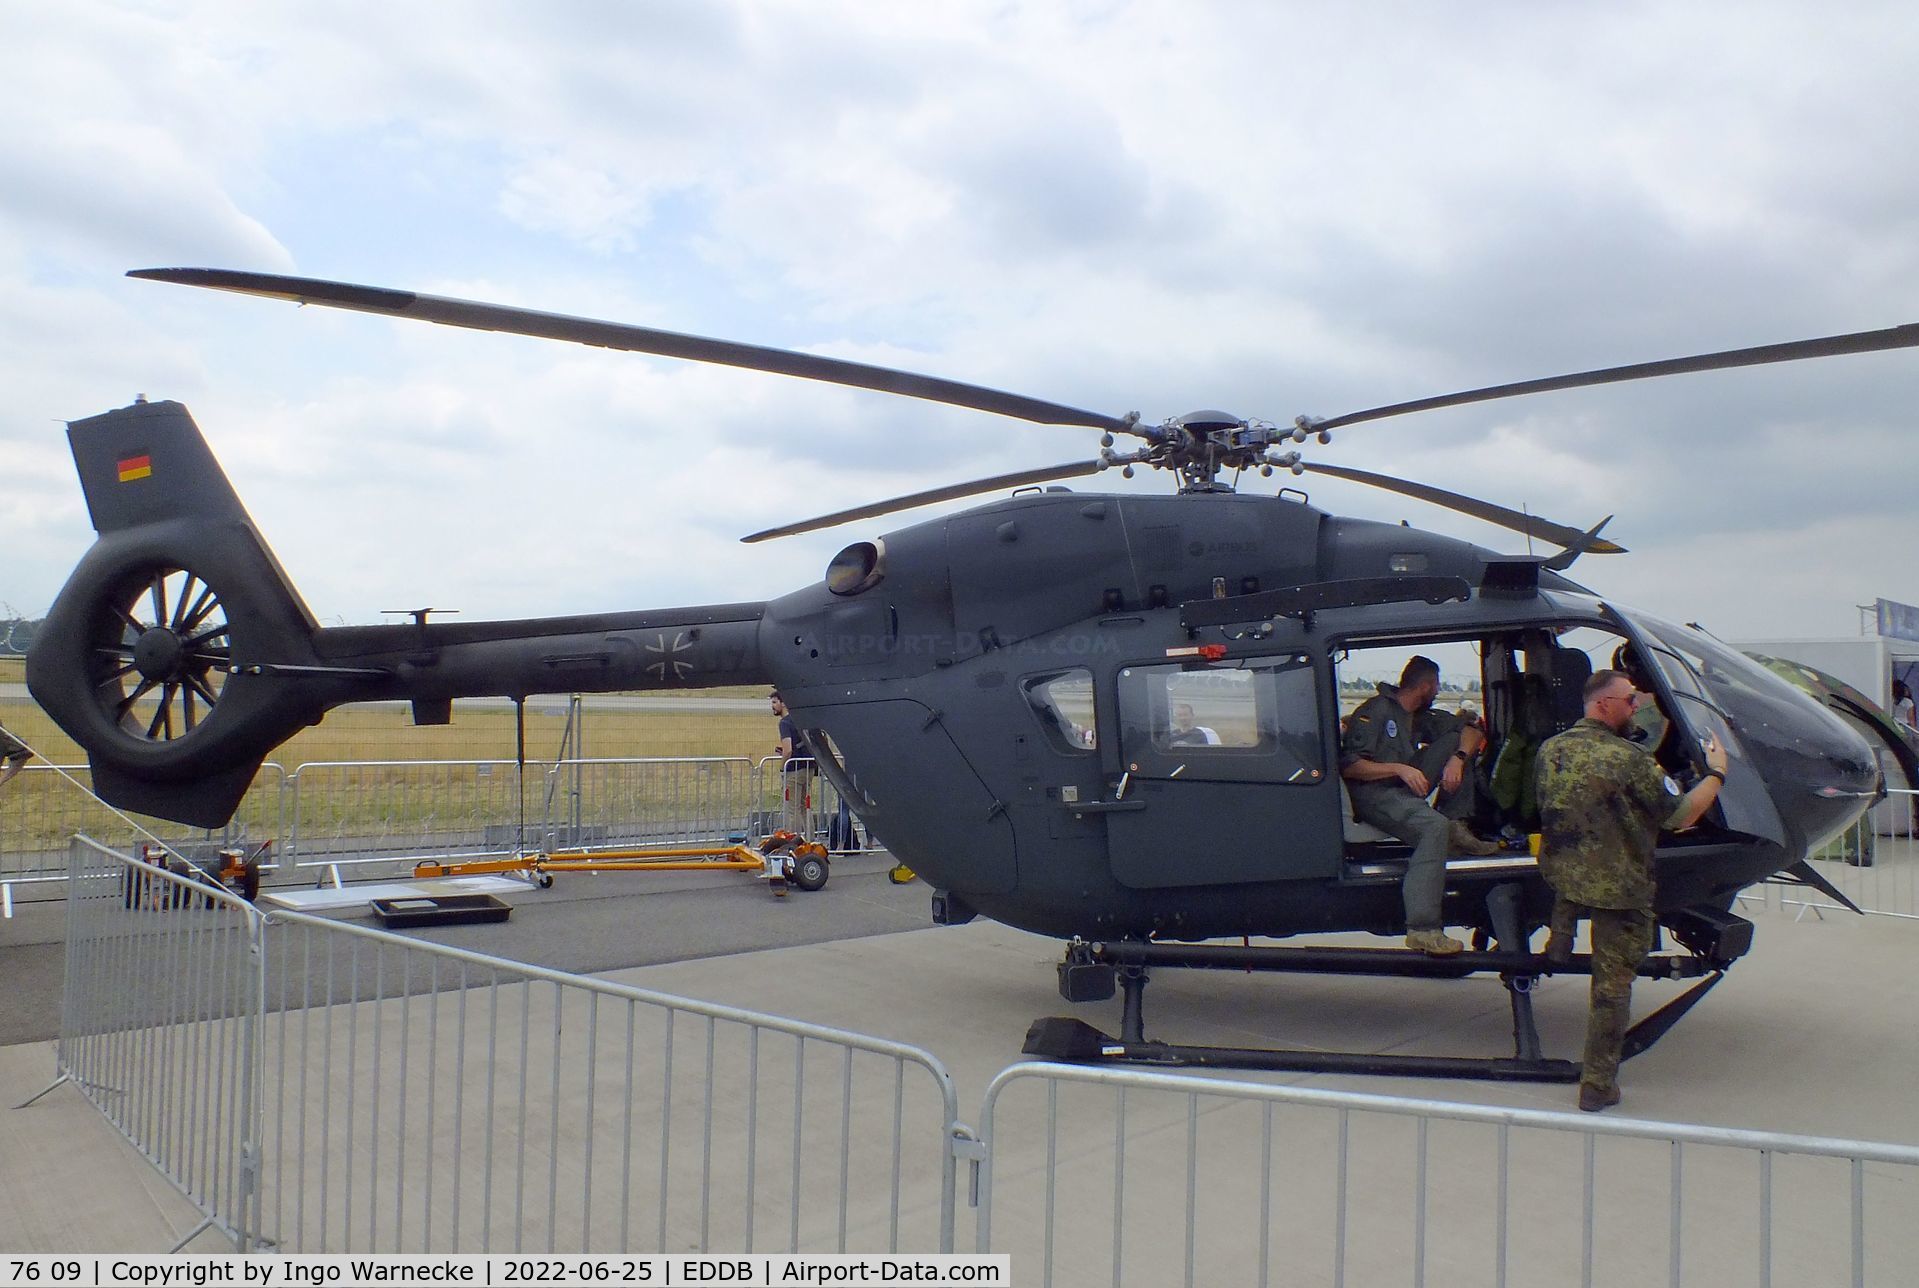 76 09, Airbus Helicopters H-145M (BK-117D-2) C/N 20096, Airbus Helicopters H145M LUH SOF of the Bundeswehr Spezialkräfte (german special operations forces) at ILA 2022, Berlin